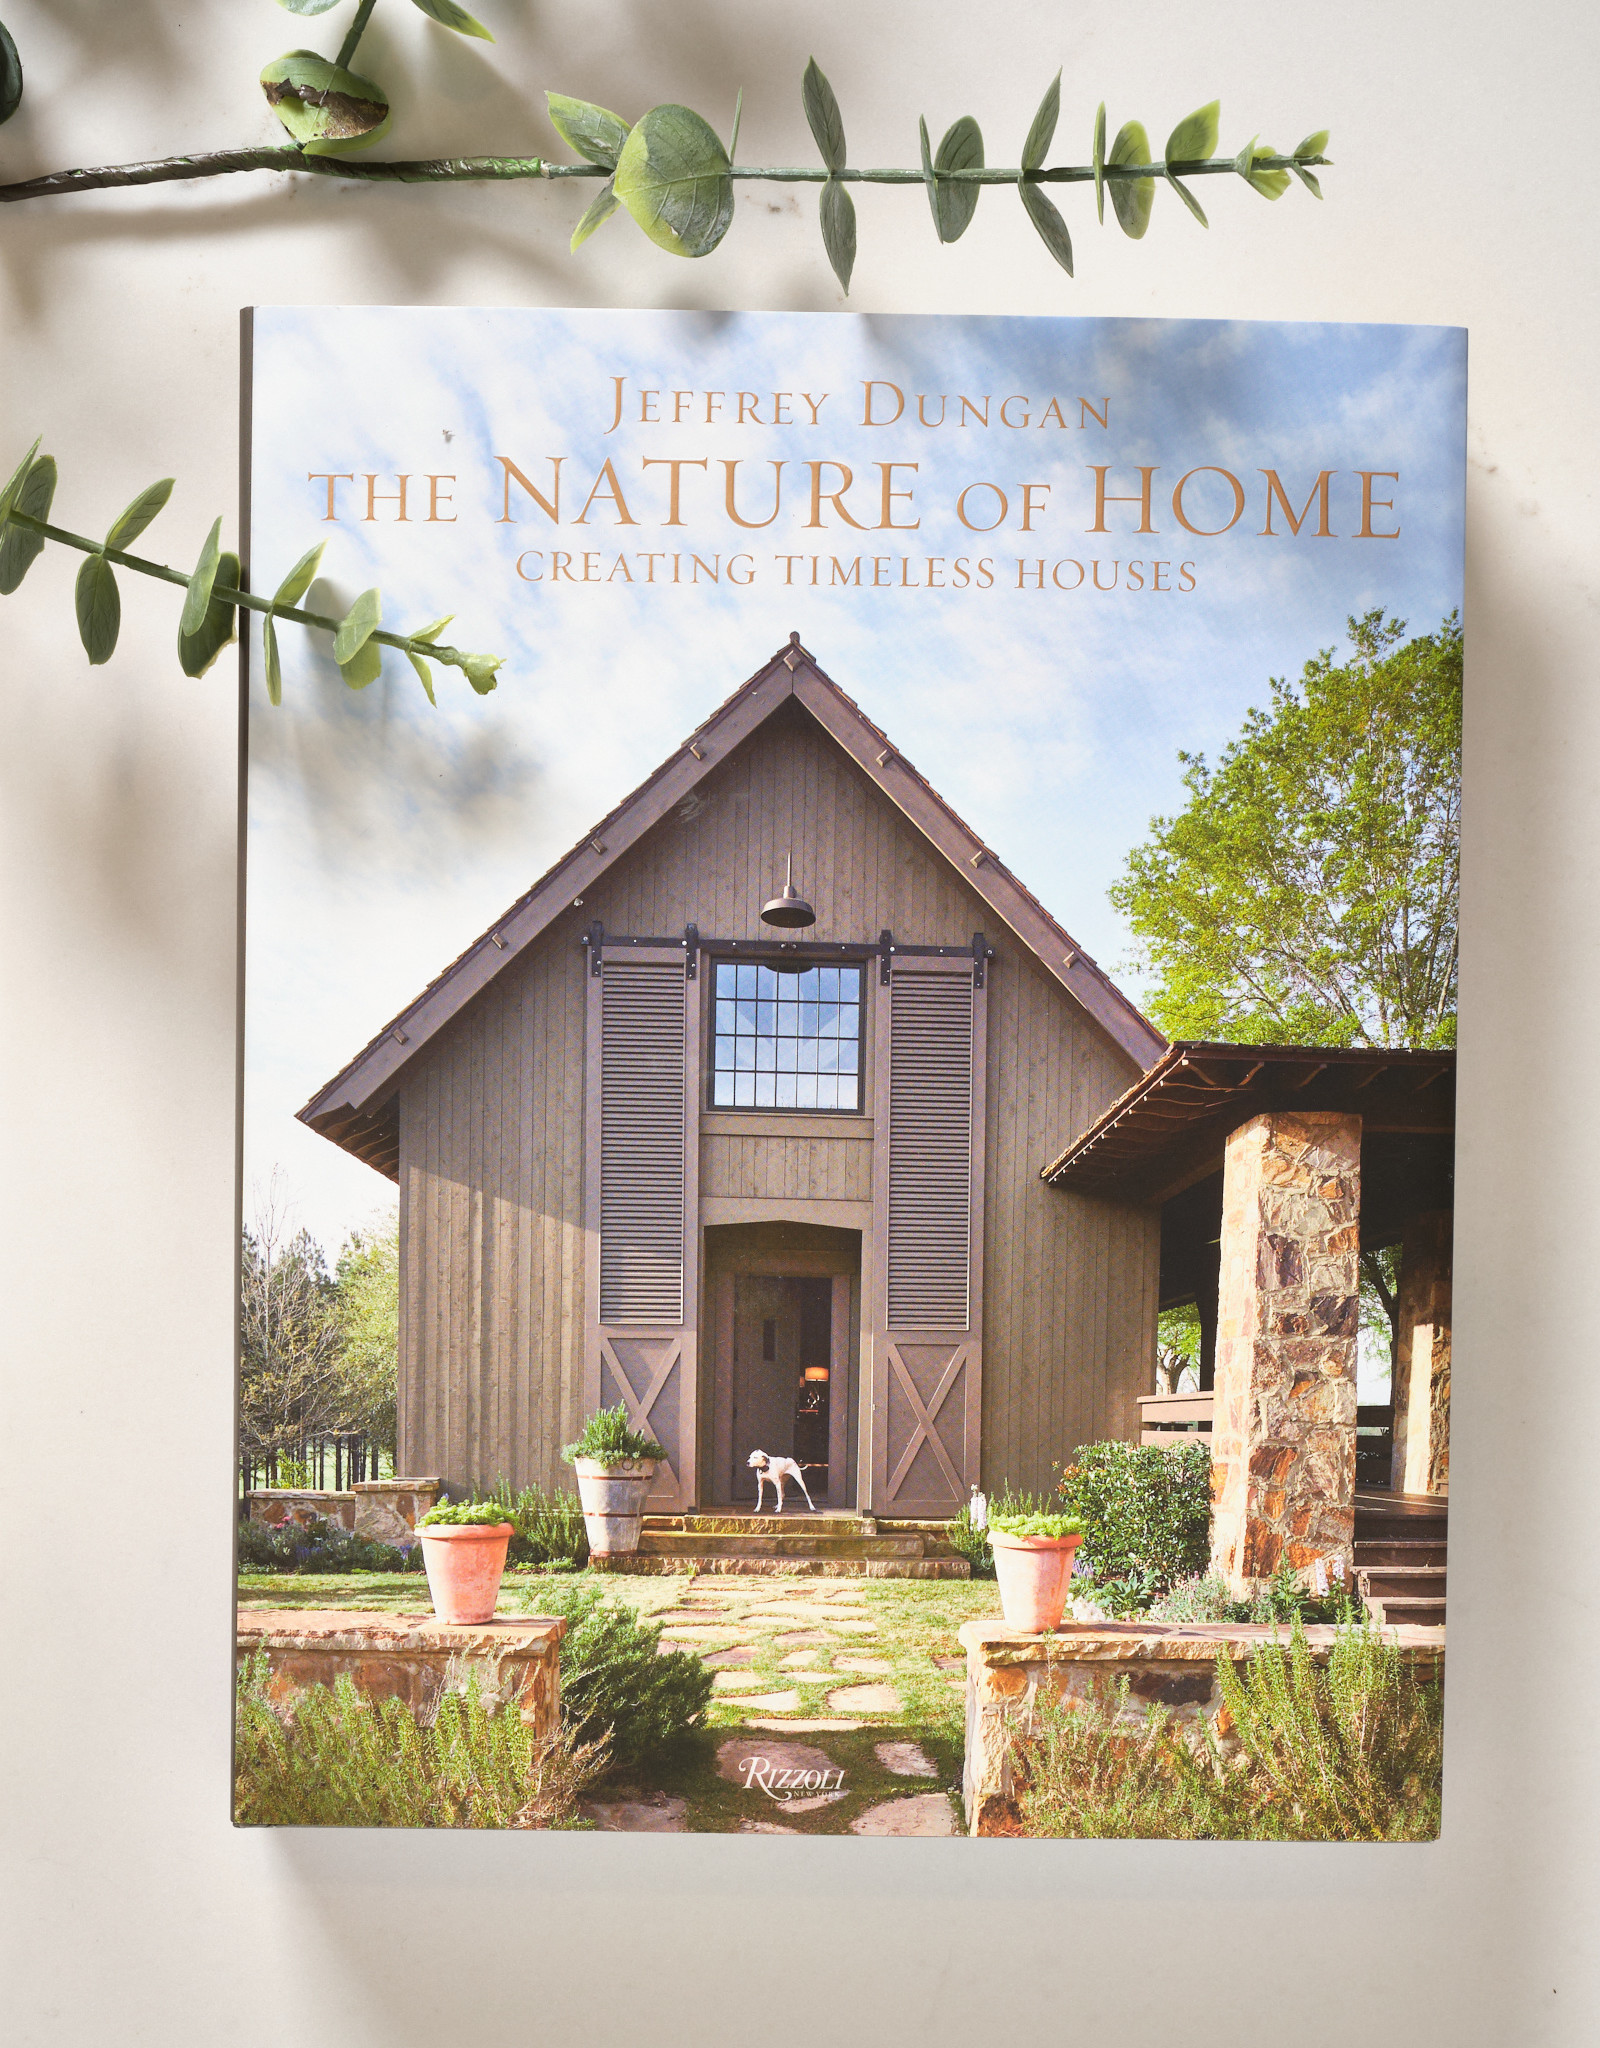 The Nature of Home, Creative Timeless Houses by Jeffrey Dugan